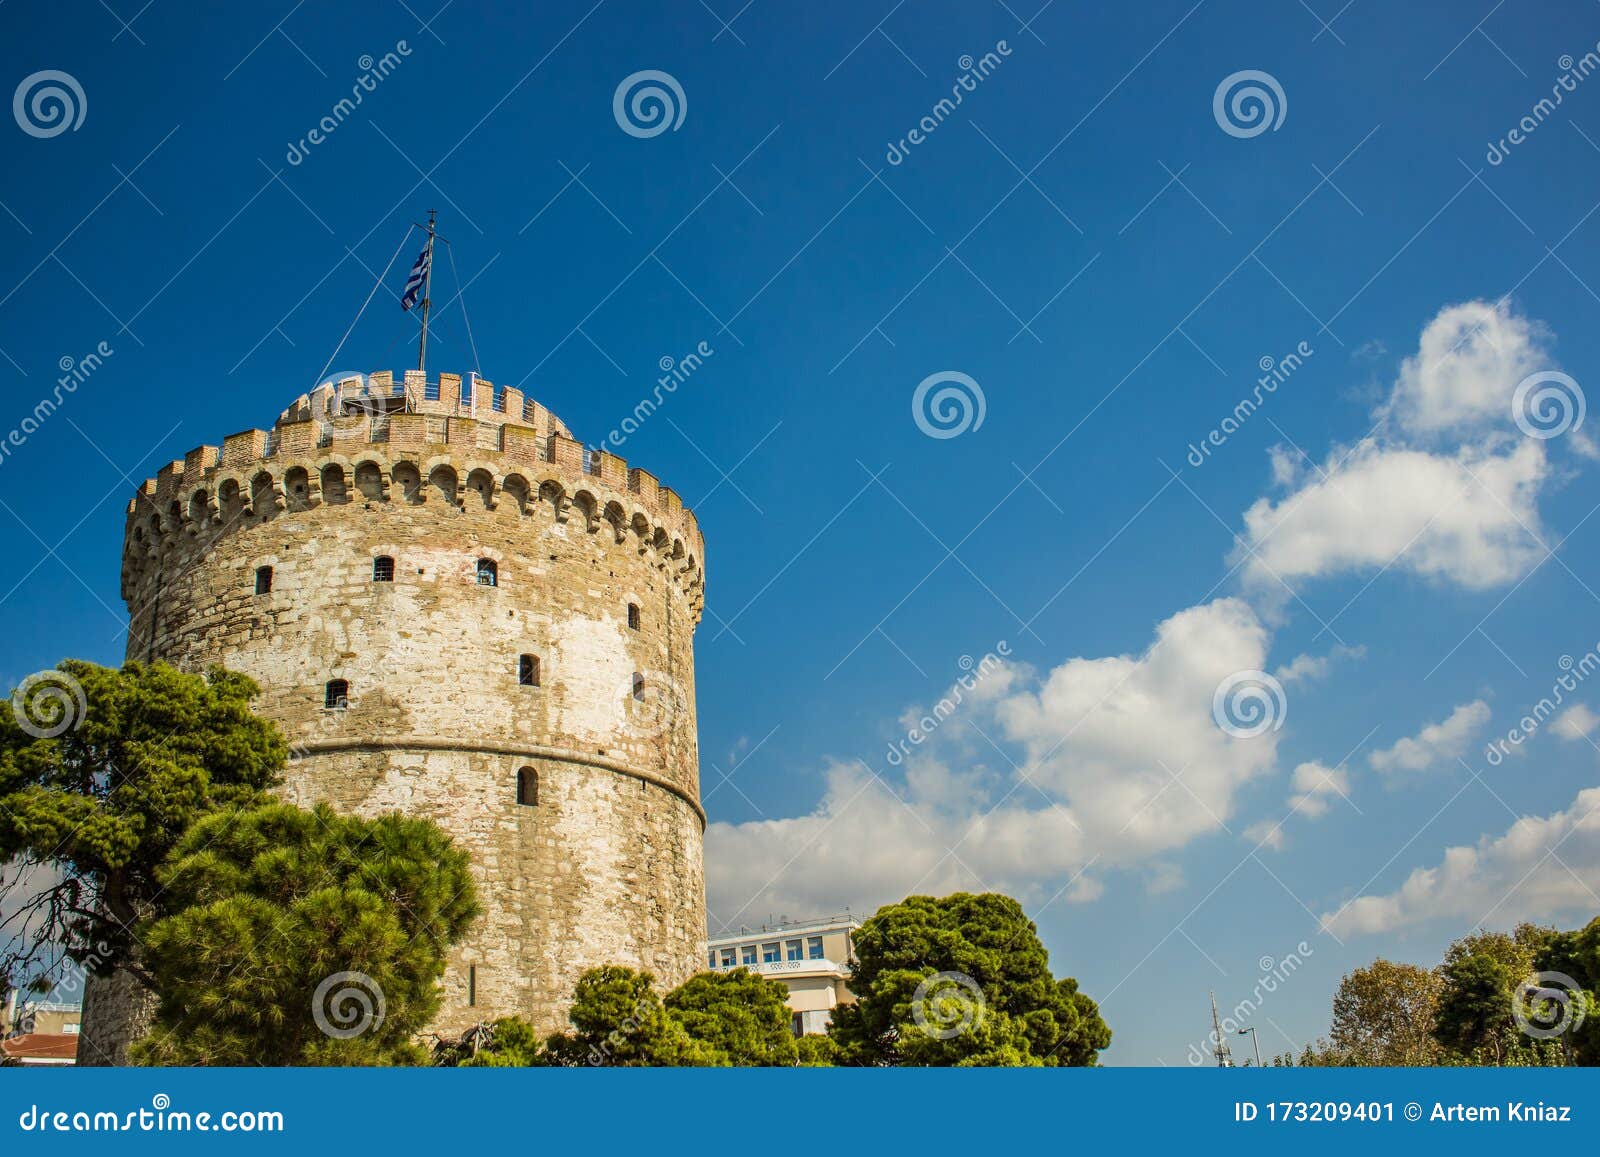 Medieval Fortress Tower Building from Byzantine Times in Greece in